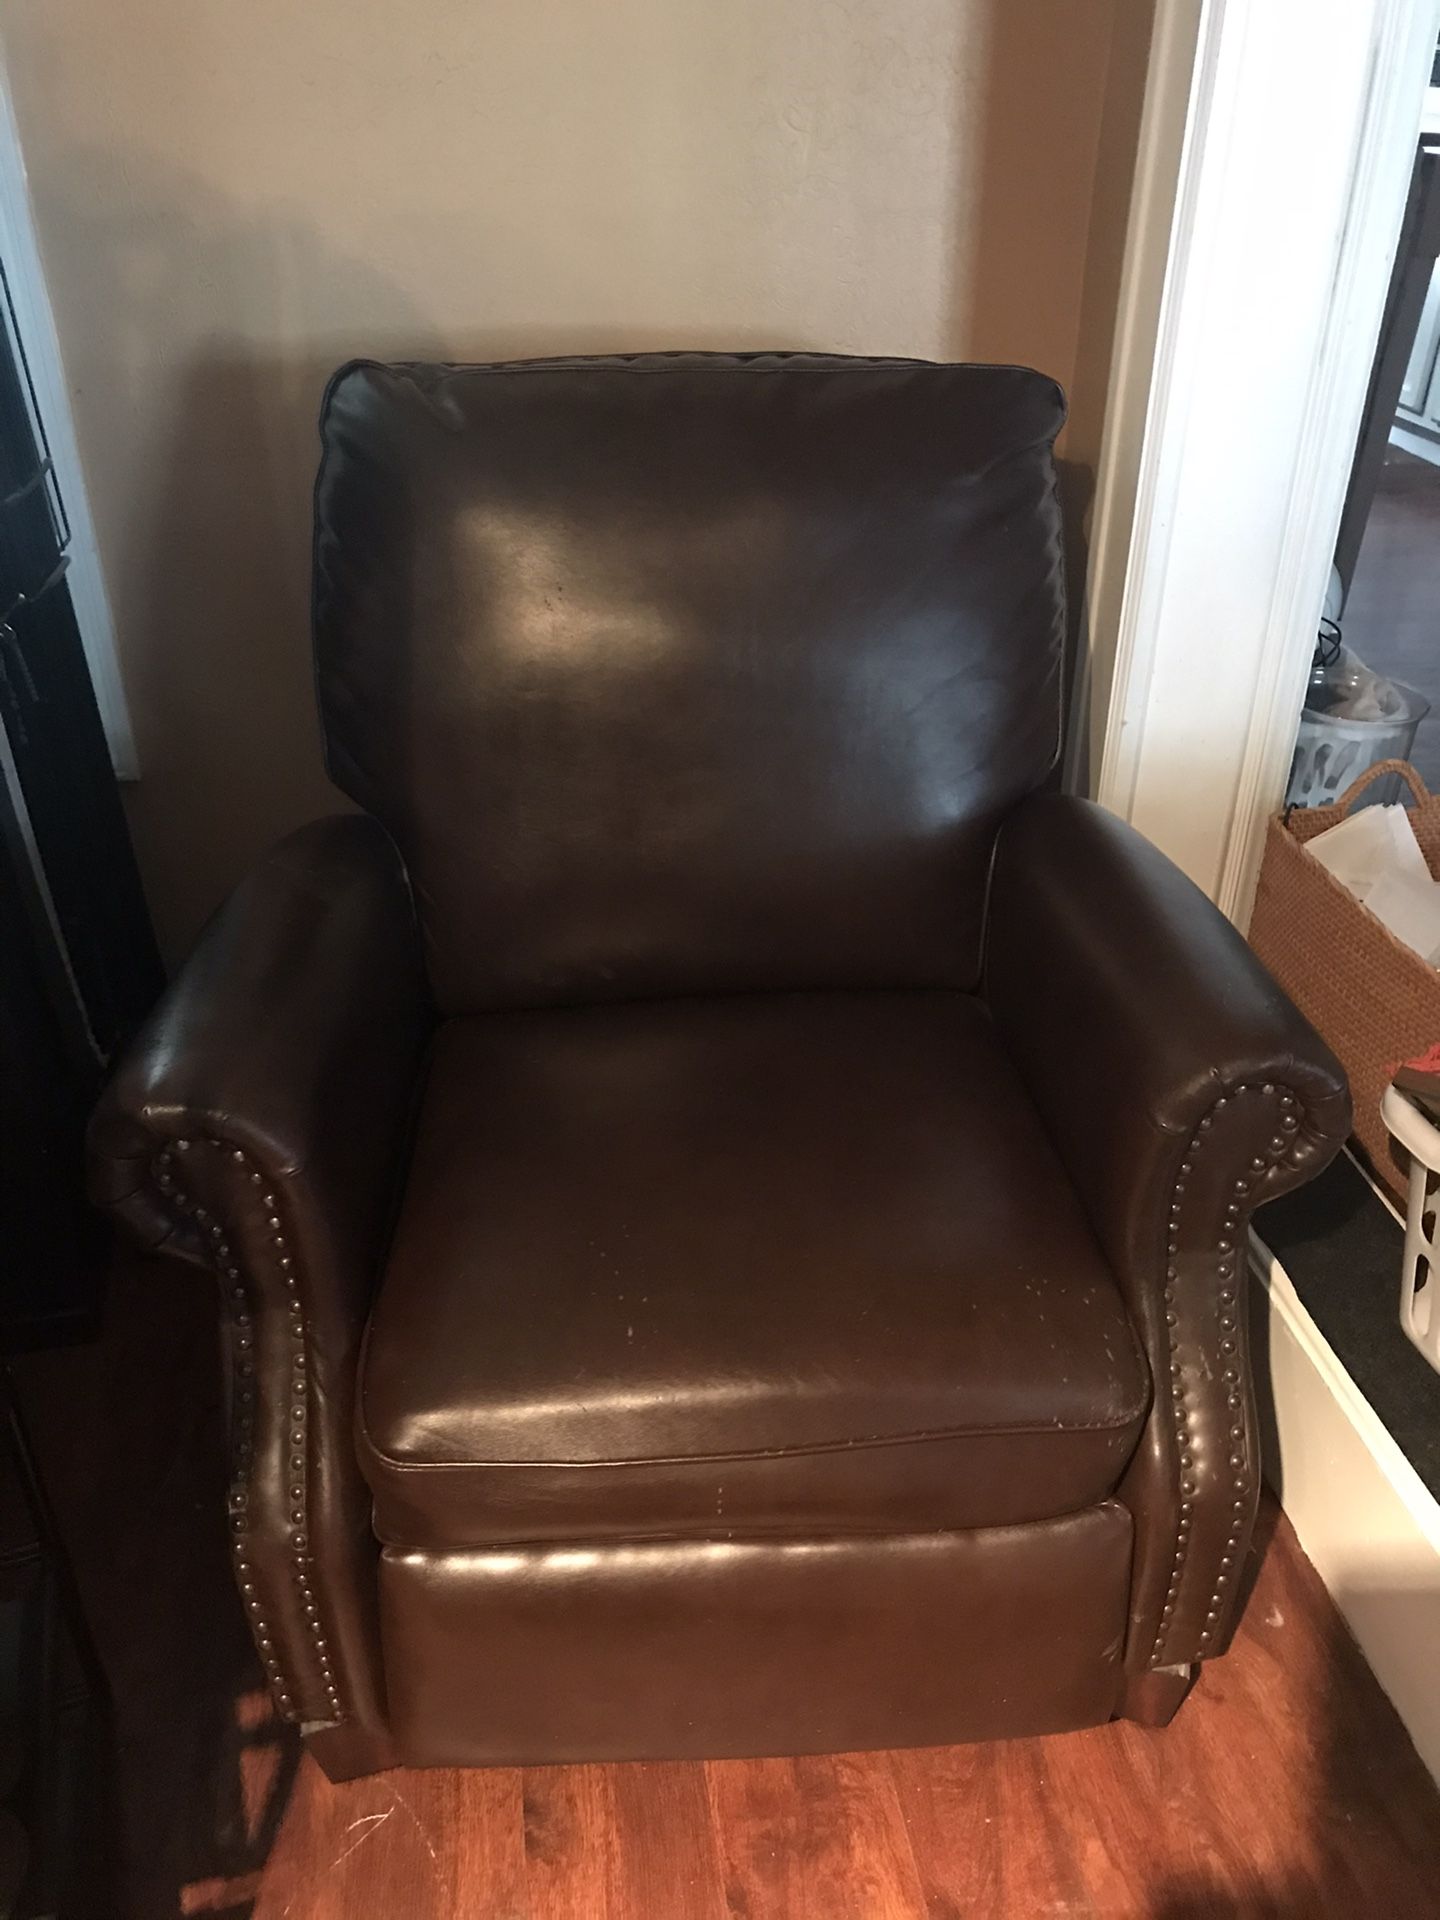 Adult size smaller size recliner